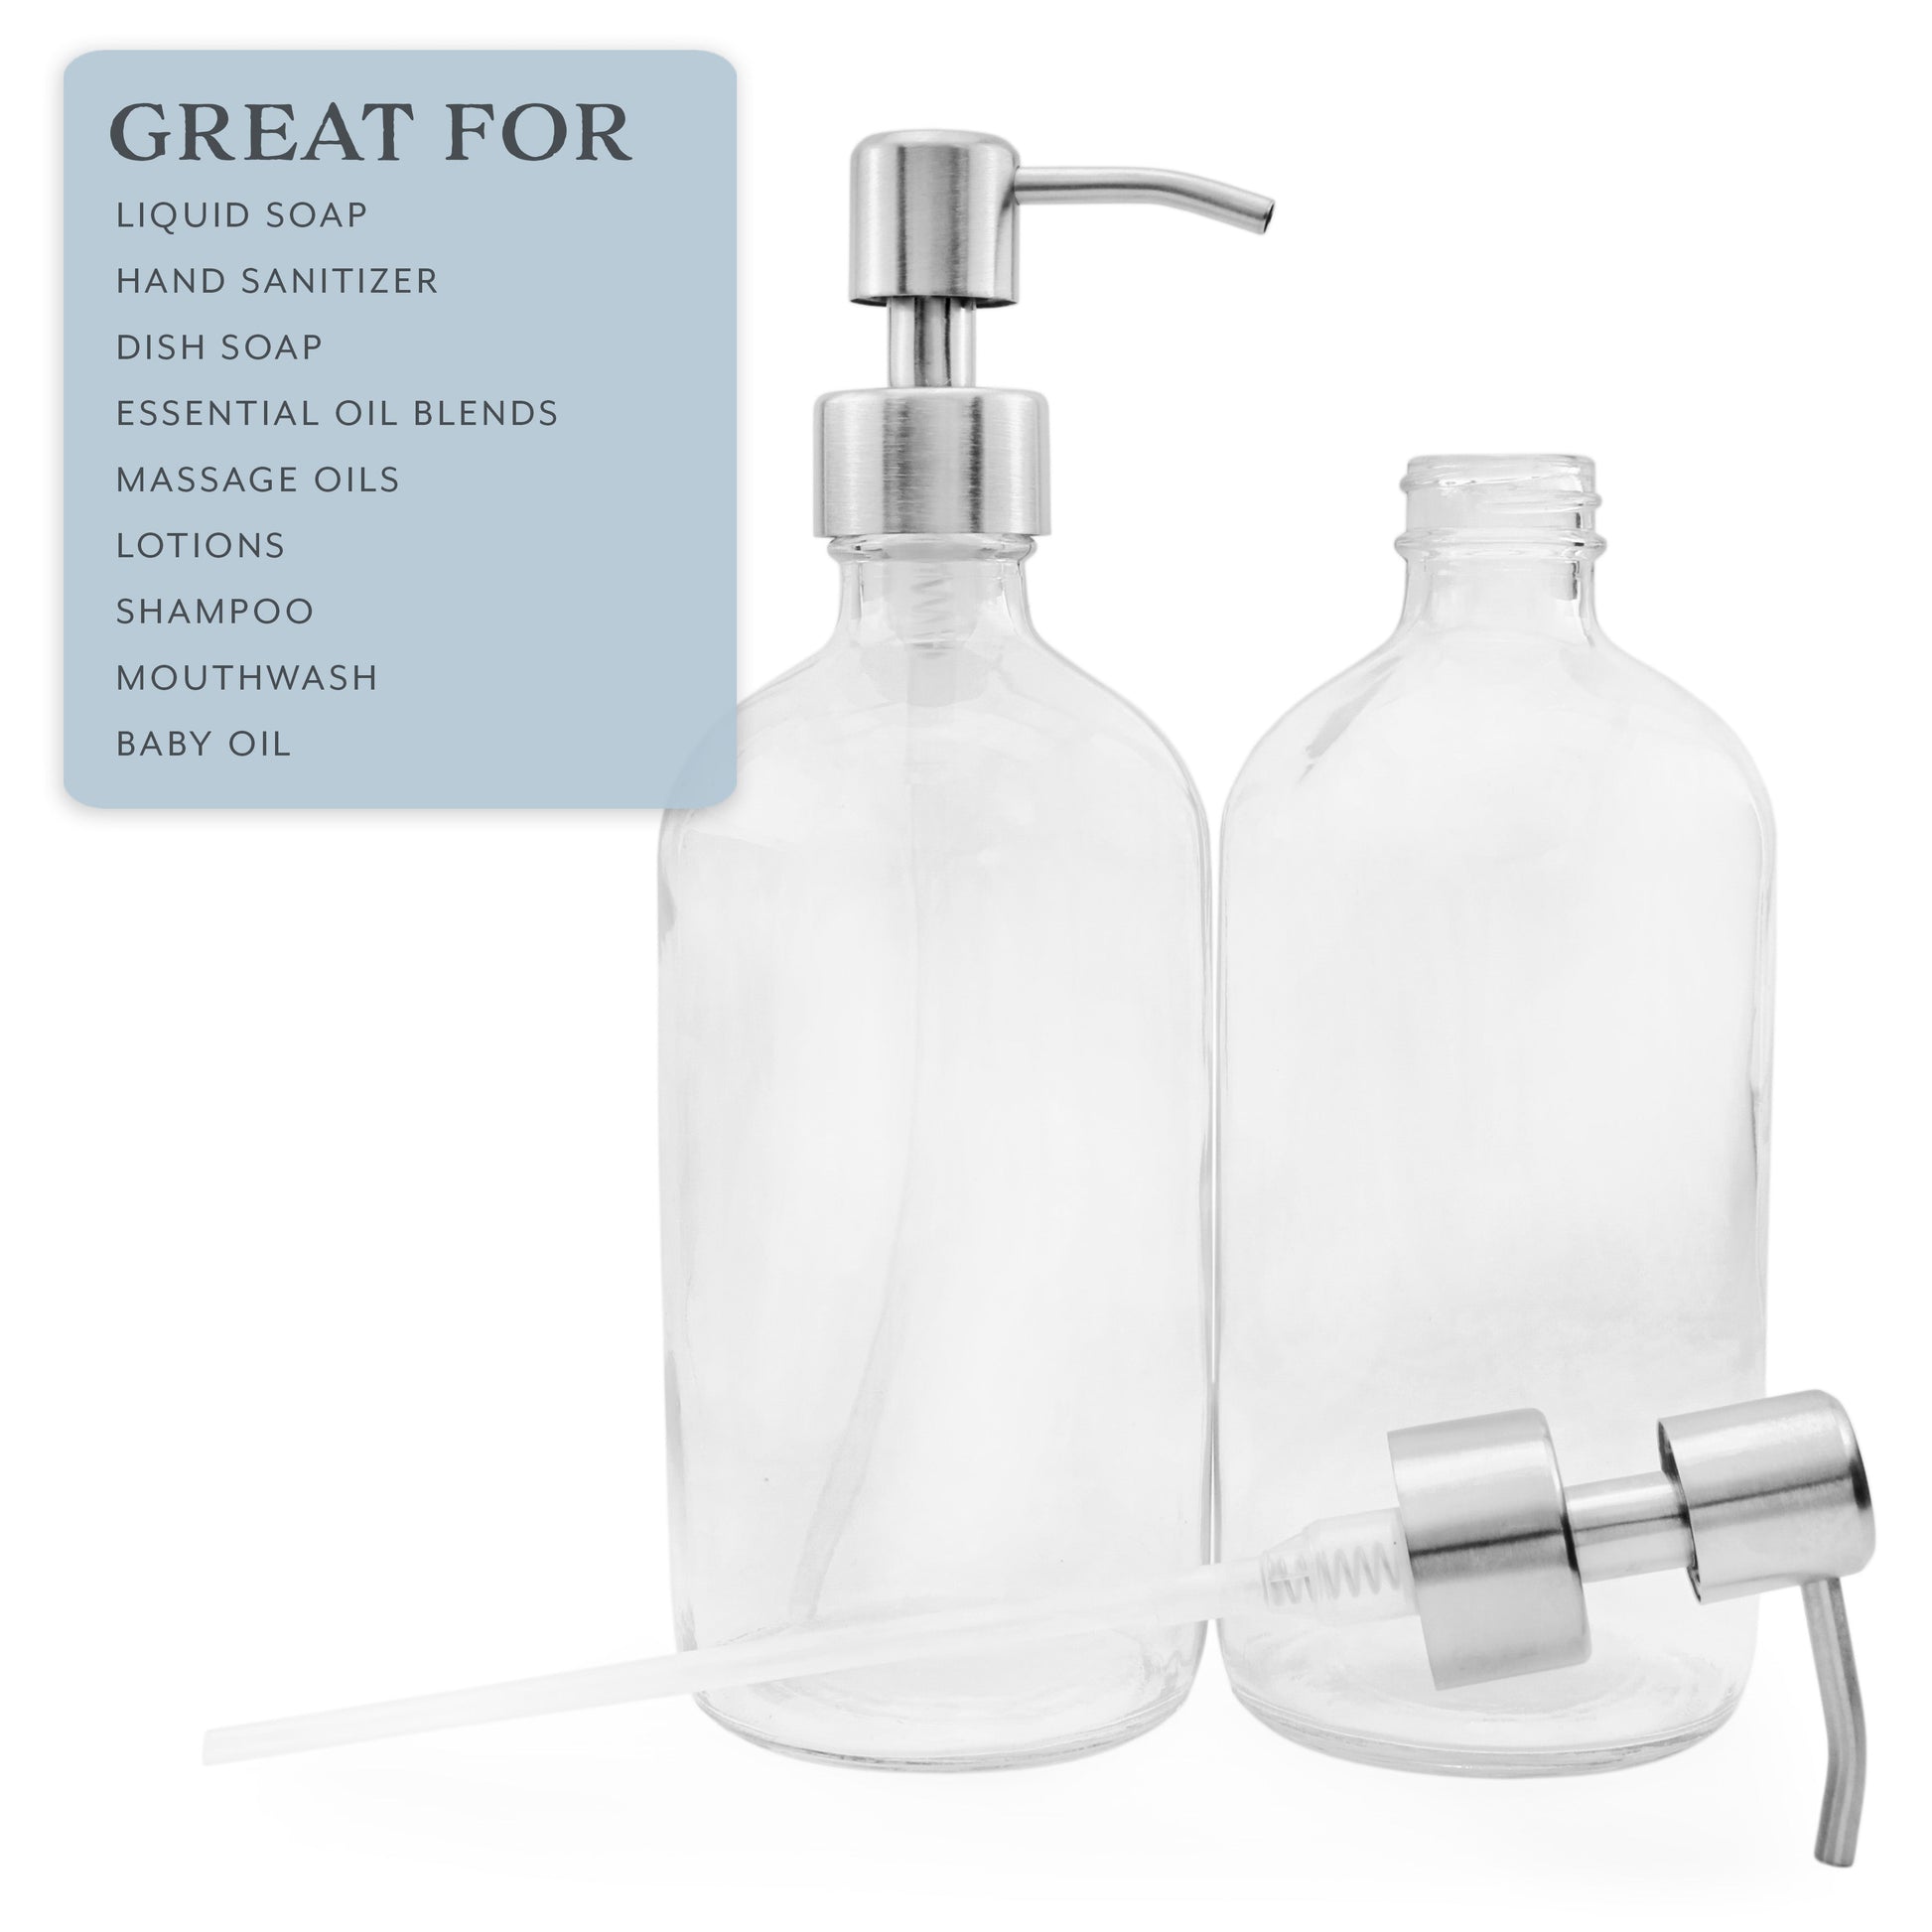 16oz Clear Glass Boston Round Bottles w/Stainless Steel Pumps (2 Pack) - sh869cb016oz